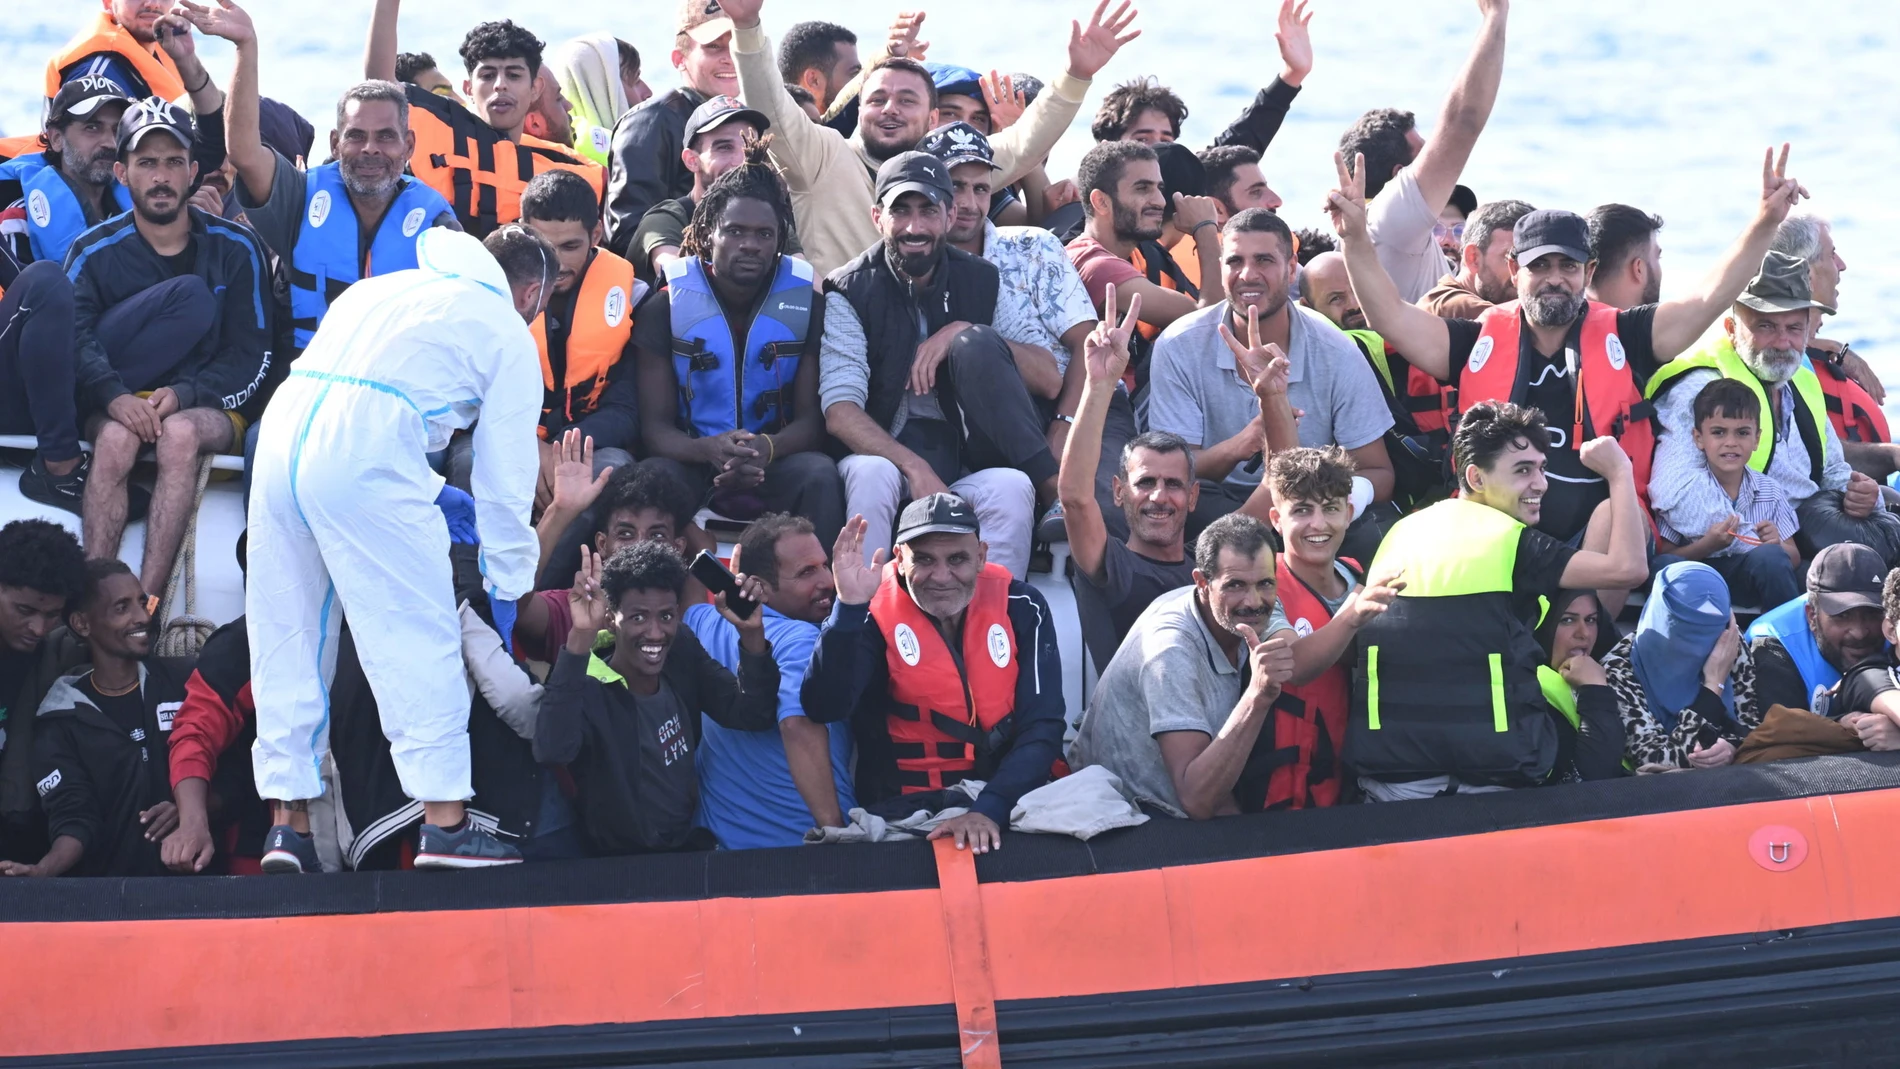 Lampedusa (Italy), 18/09/2023.- Migrants crowd the deck of the Italian Coast Guard patrol boat CP327 as it arrives in the port of Lampedusa, 18 September 2023. More than 1,000 migrants remain in the hotspots of Lampedusa where they await transfer. Italian Deputy Premier and Foreign Minister Antonio Tajani on 15 September called for the intervention of the United Nations in response to the significant increase in the arrival of migrants and refugees by sea to Italy in recent days. (Italia) EFE...